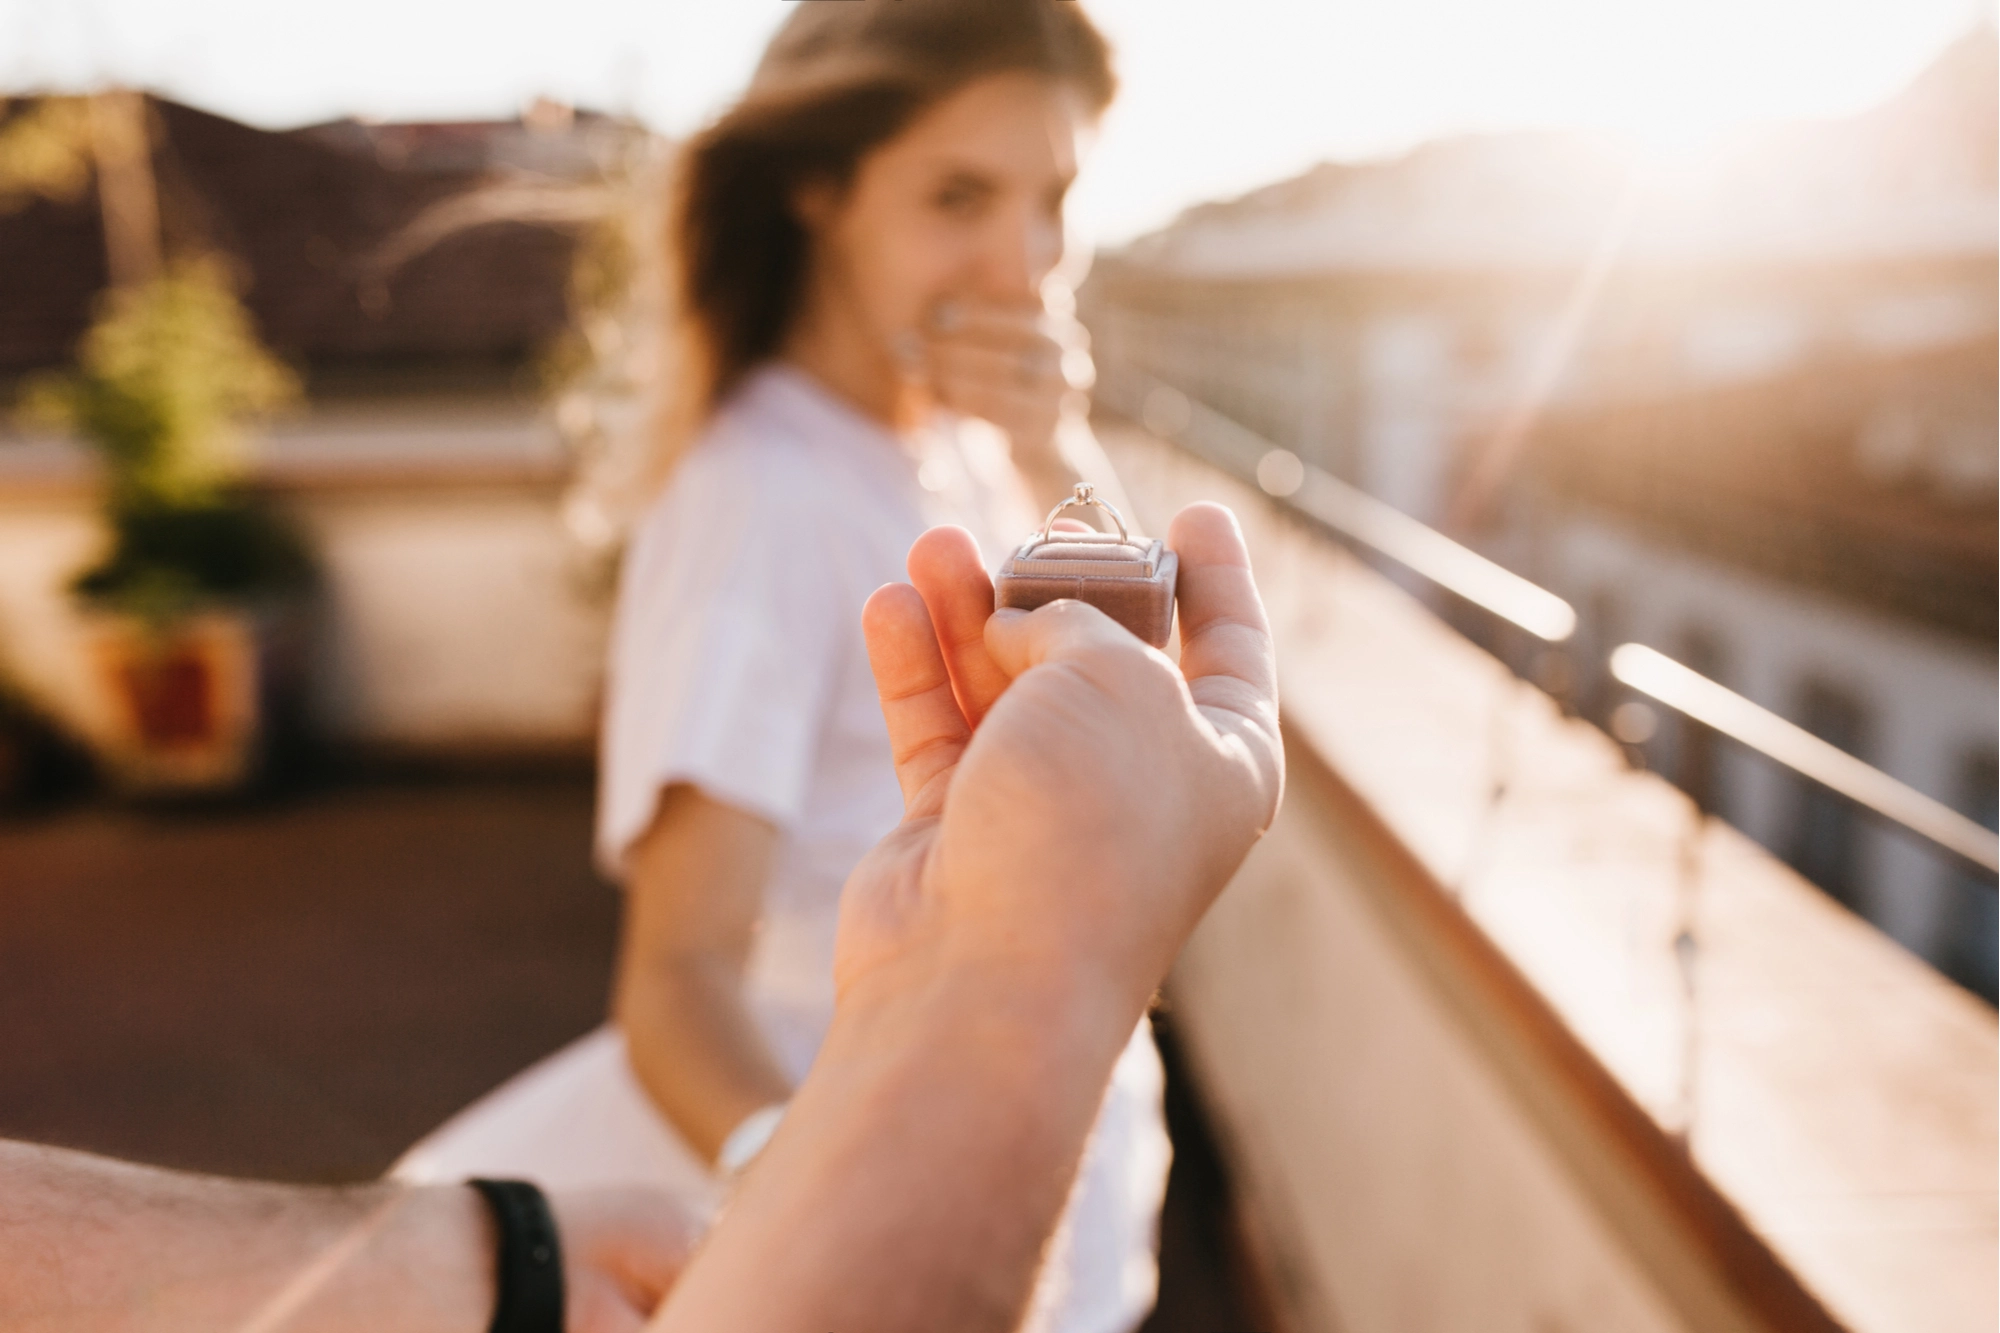 Newly Engaged? Here’s How to Spend the First 12 Days